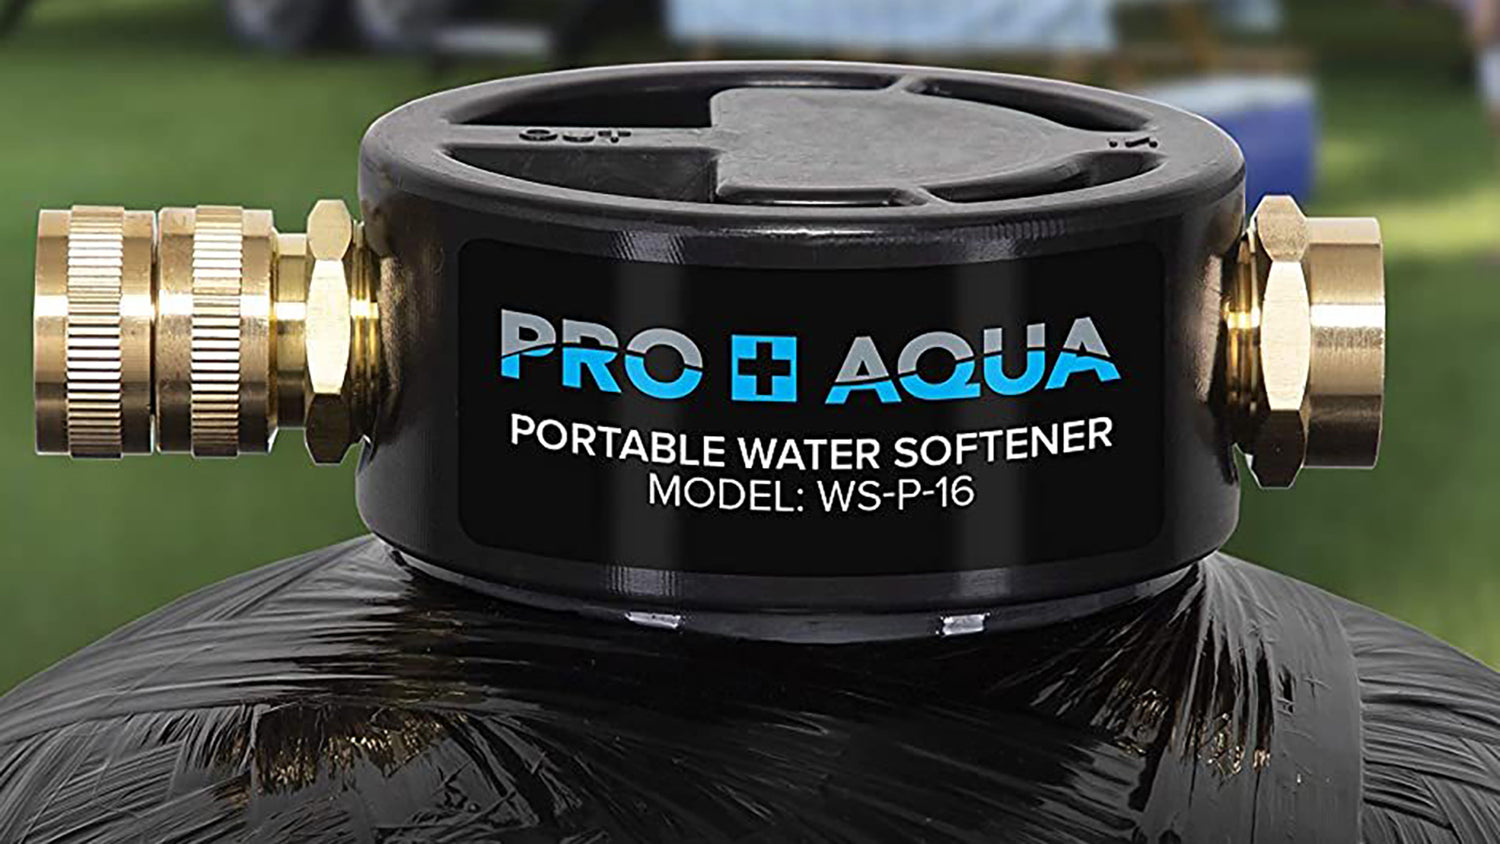 What's Inside The Premium Pro Portable Water Softener Travel Series?